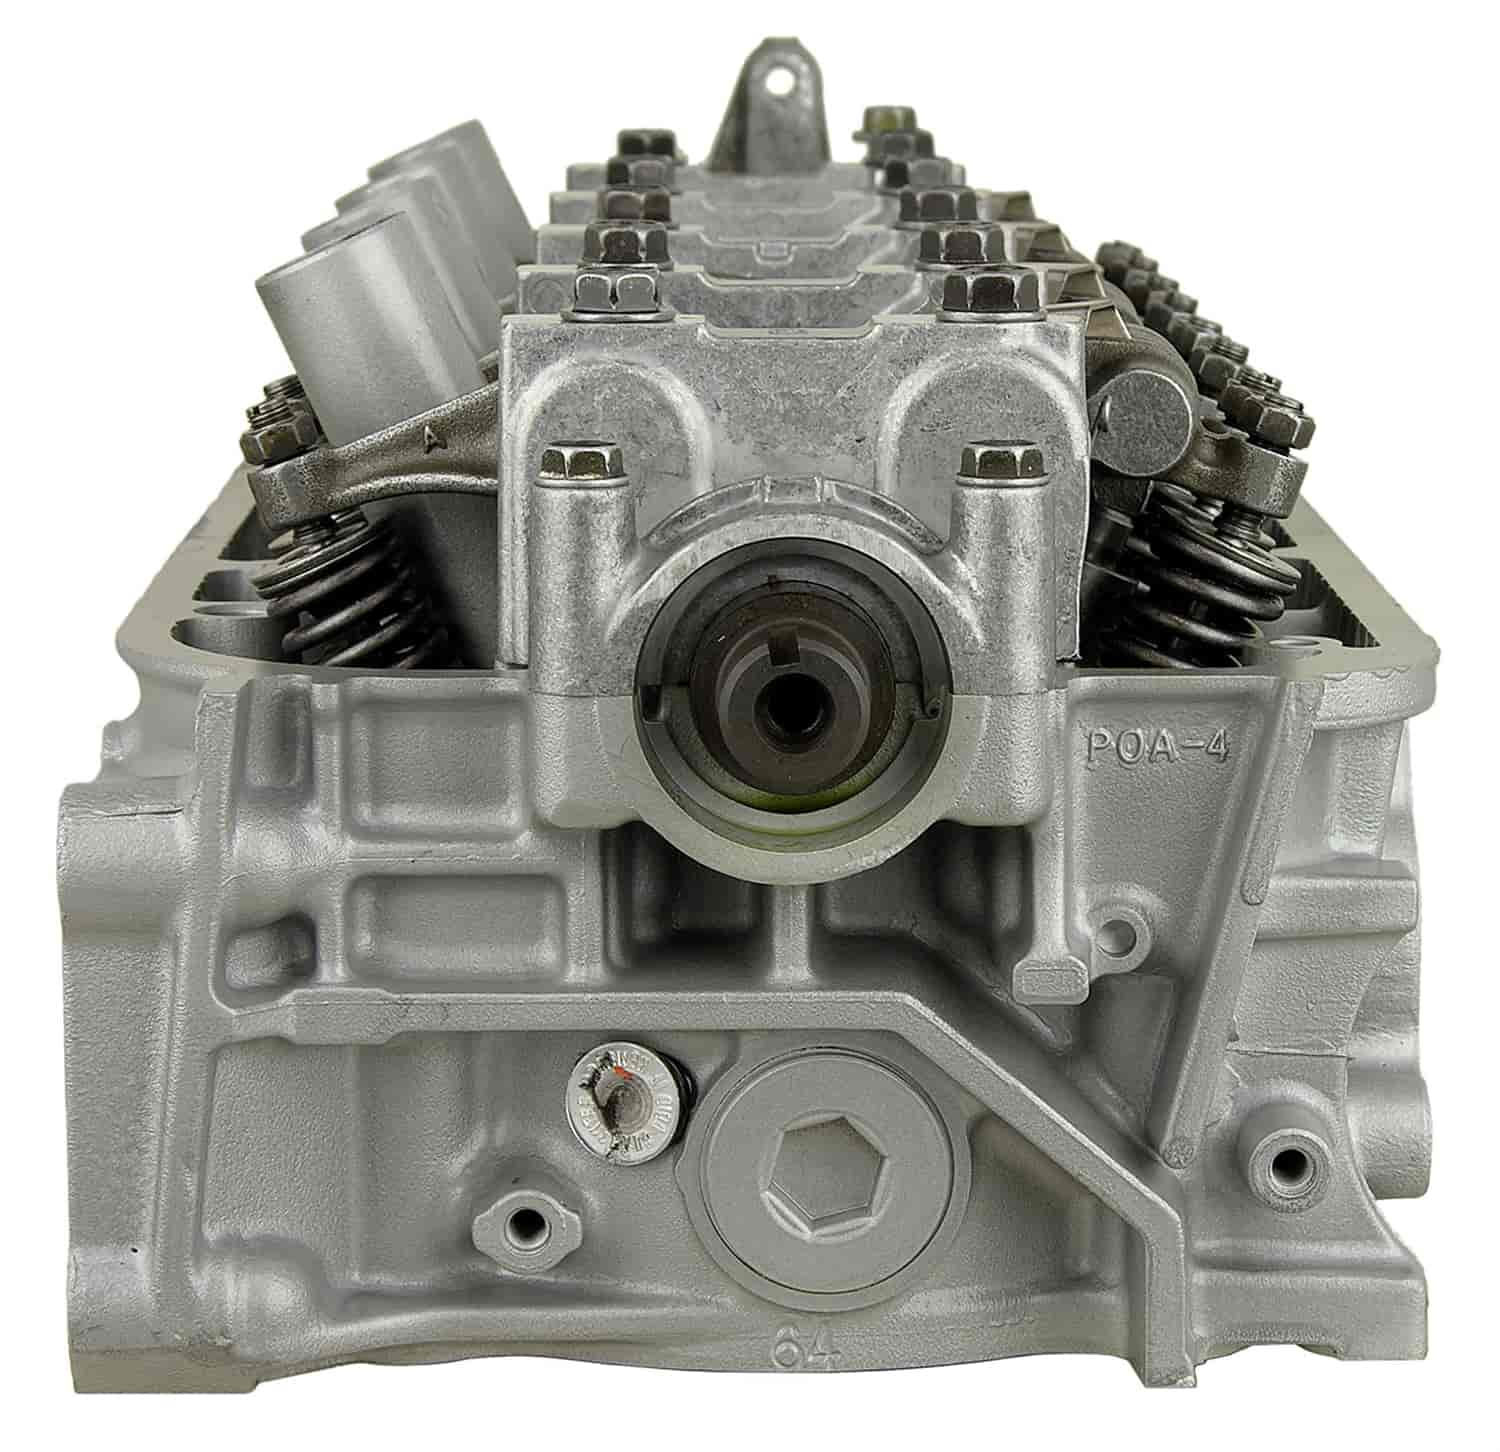 Remanufactured Cylinder Head for 1994-1997 Acura/Honda with 2.2L L4 F22B1